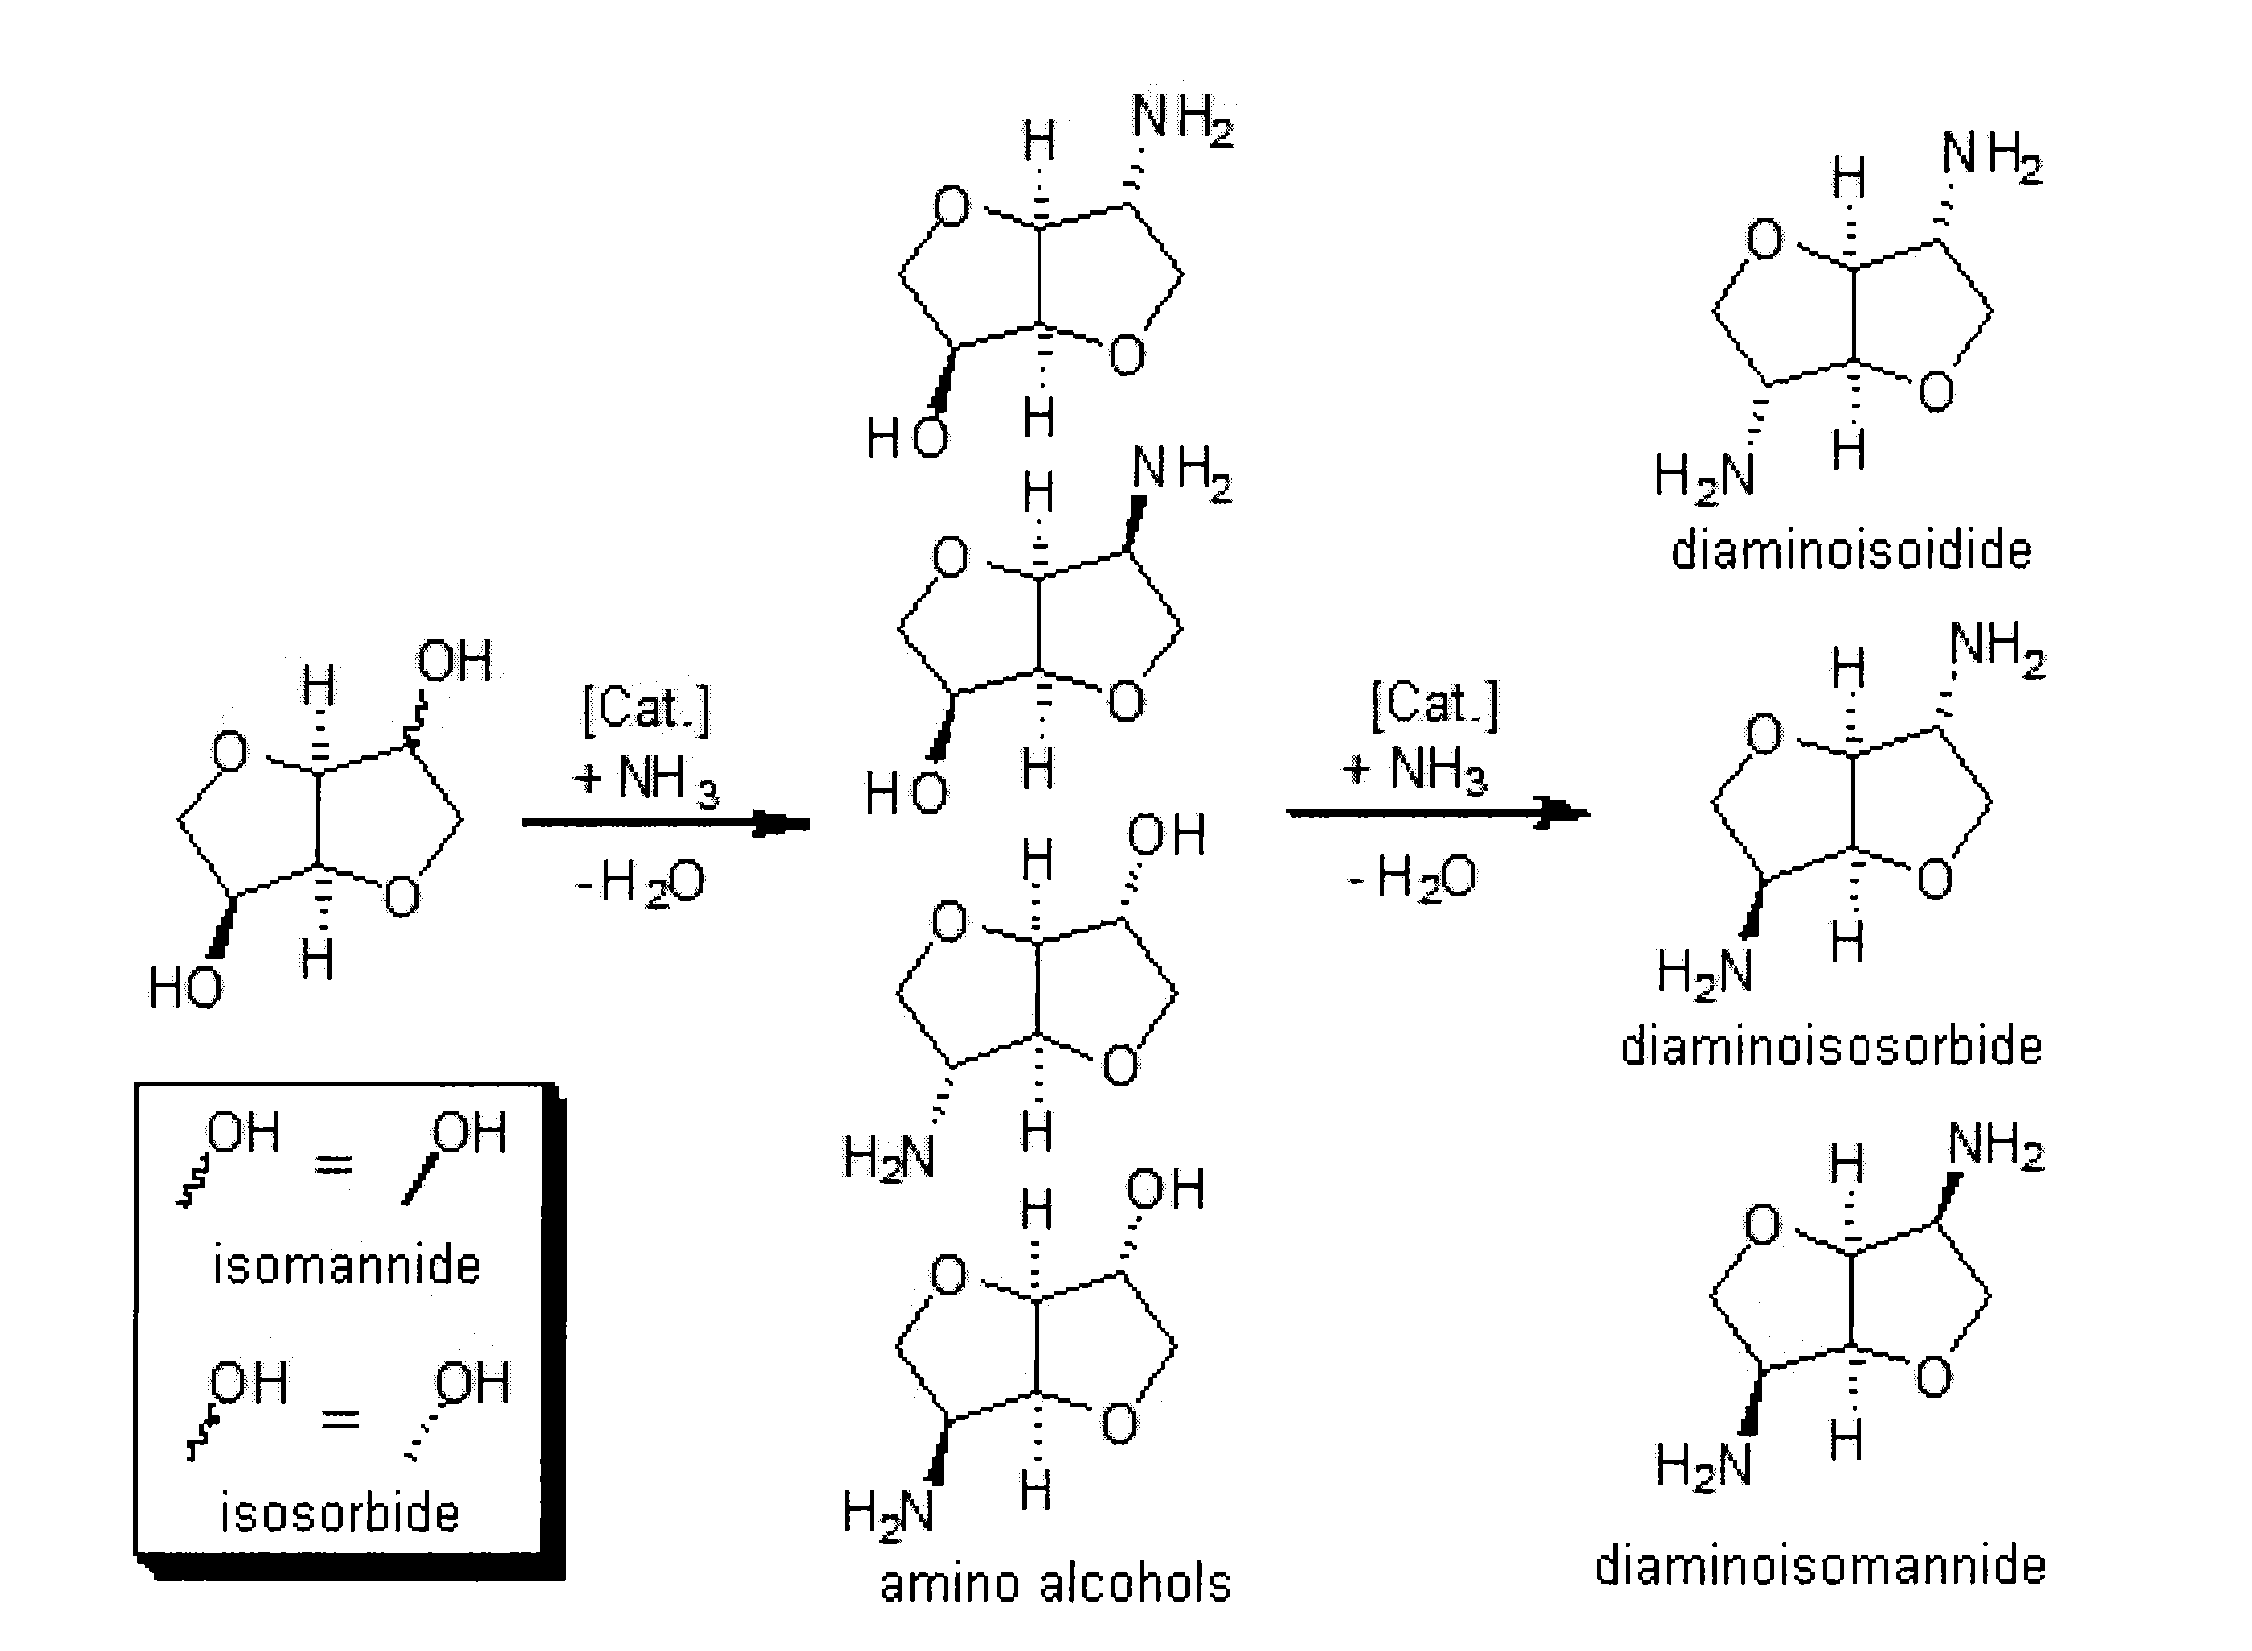 Process for the direct amination of secondary alcohols with ammonia to give primary amines